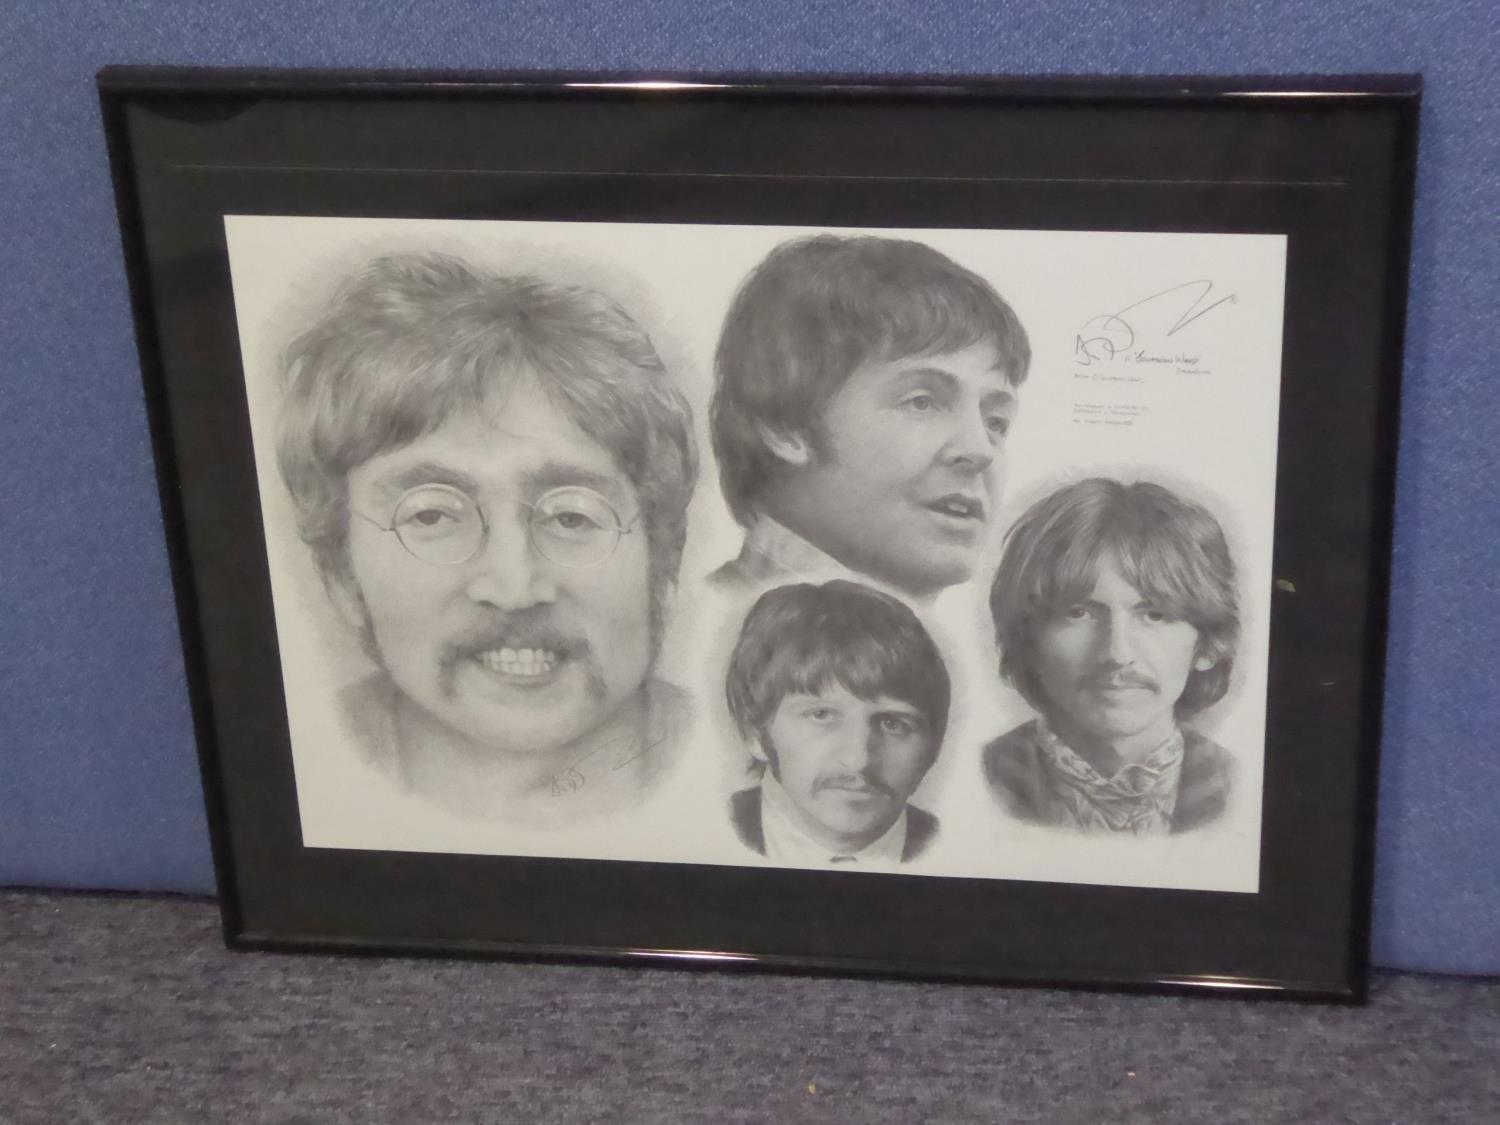 THE BEATLES, LIMITED EDITION SET OF FOUR REPRODUCTION BLACK AND WHITE PHOTOGRAPHS OF THE GROUP TAKEN - Image 2 of 3